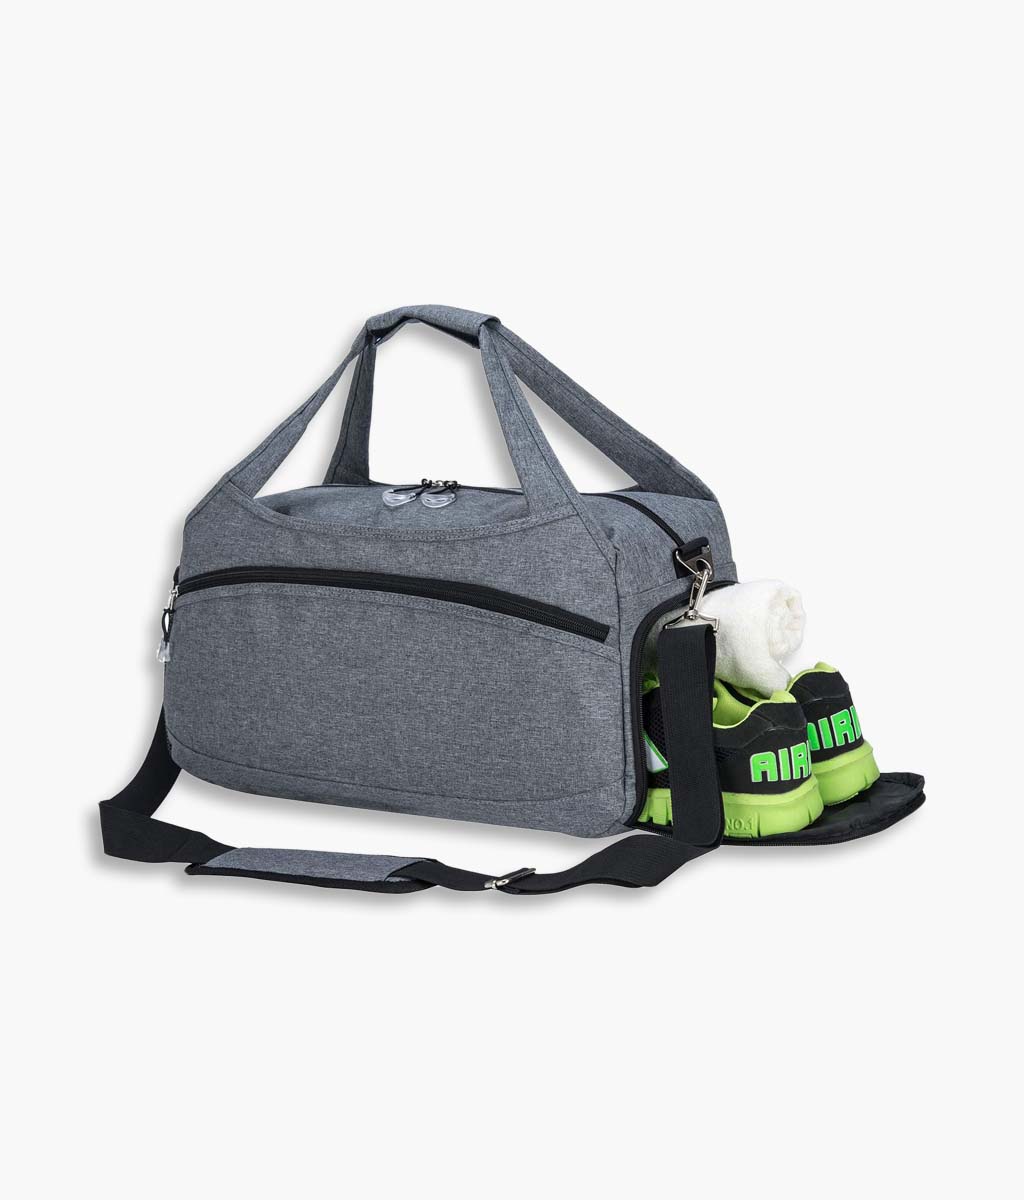 Sports Travel Duffel Bag with Shoes Pocket